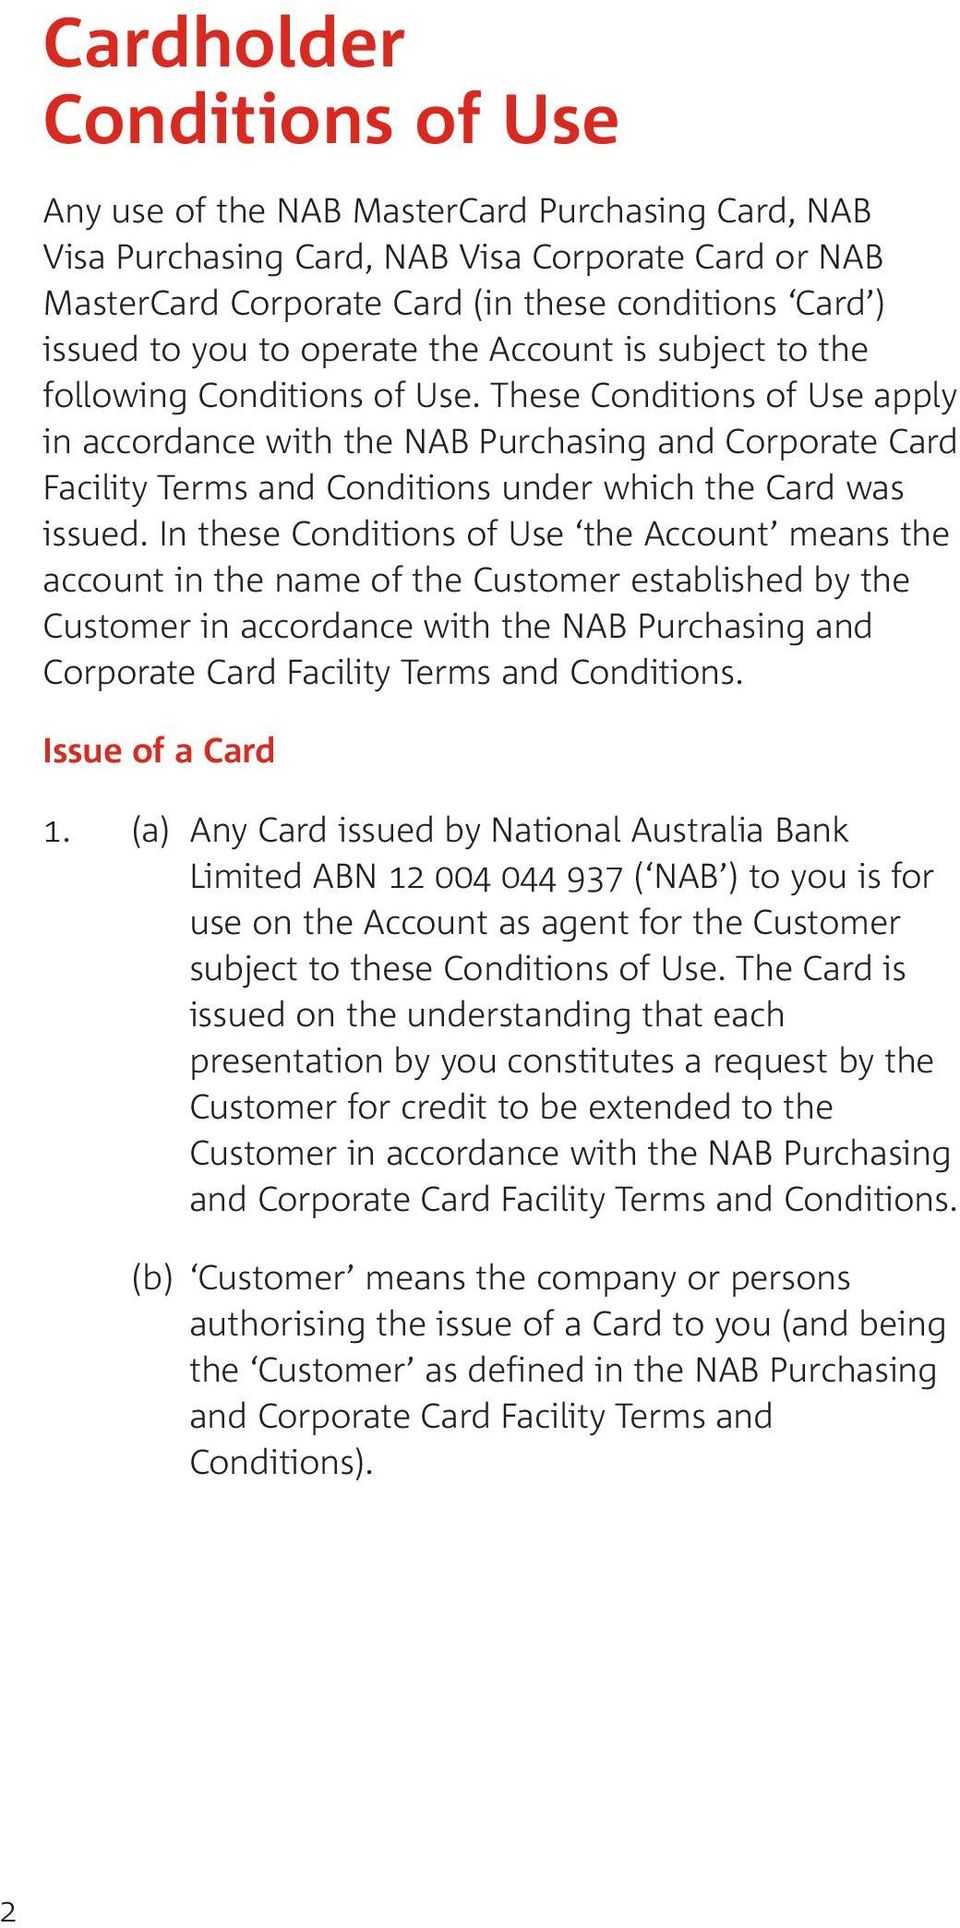 These Conditions of Use apply in accordance with the NAB Purchasing and Corporate Card Facility Terms and Conditions under which the Card was issued.